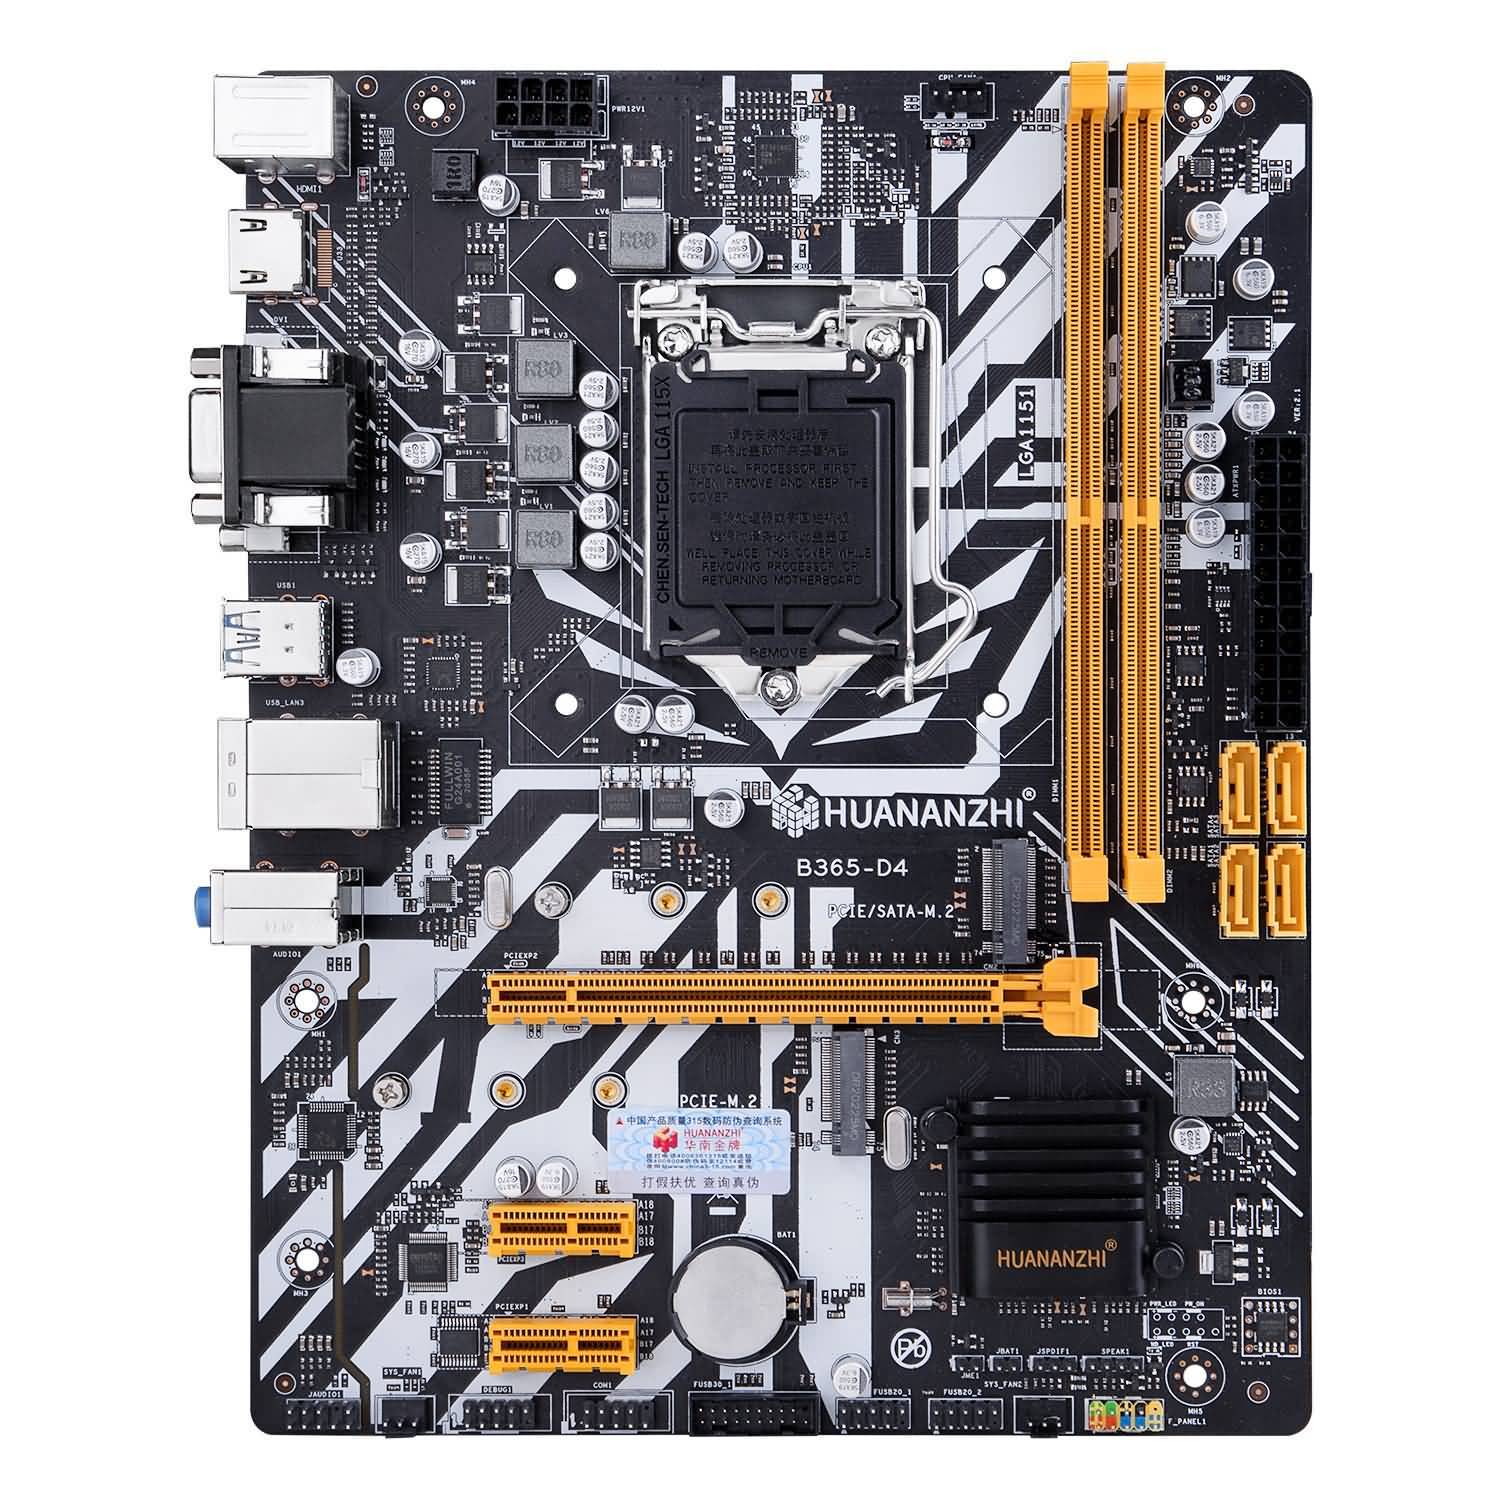 Download Huananzhi B365-D4 Motherboard Free